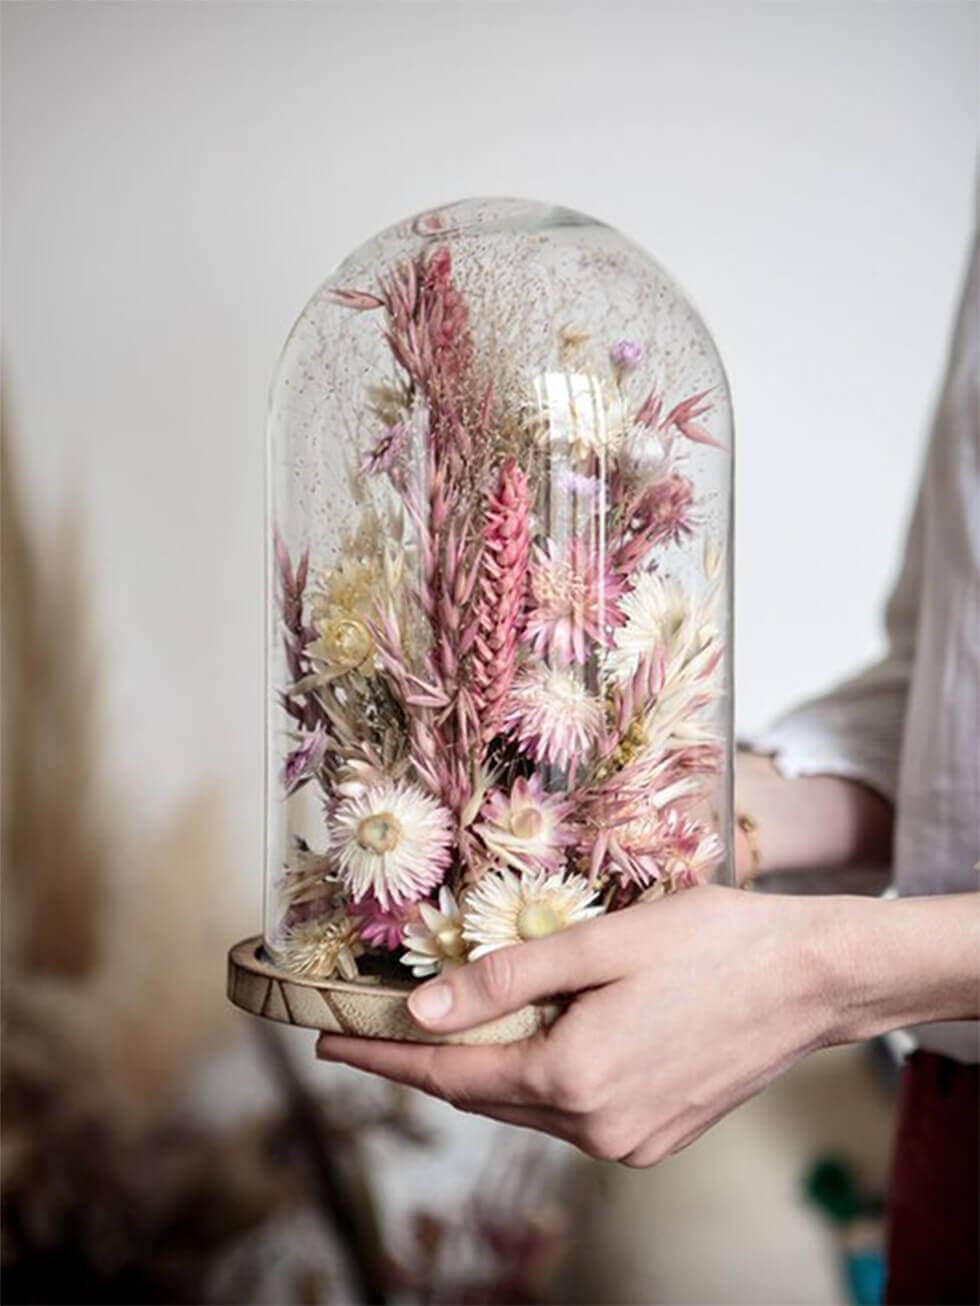 Dried flowers arranged in a sealed bell jar for decoration.